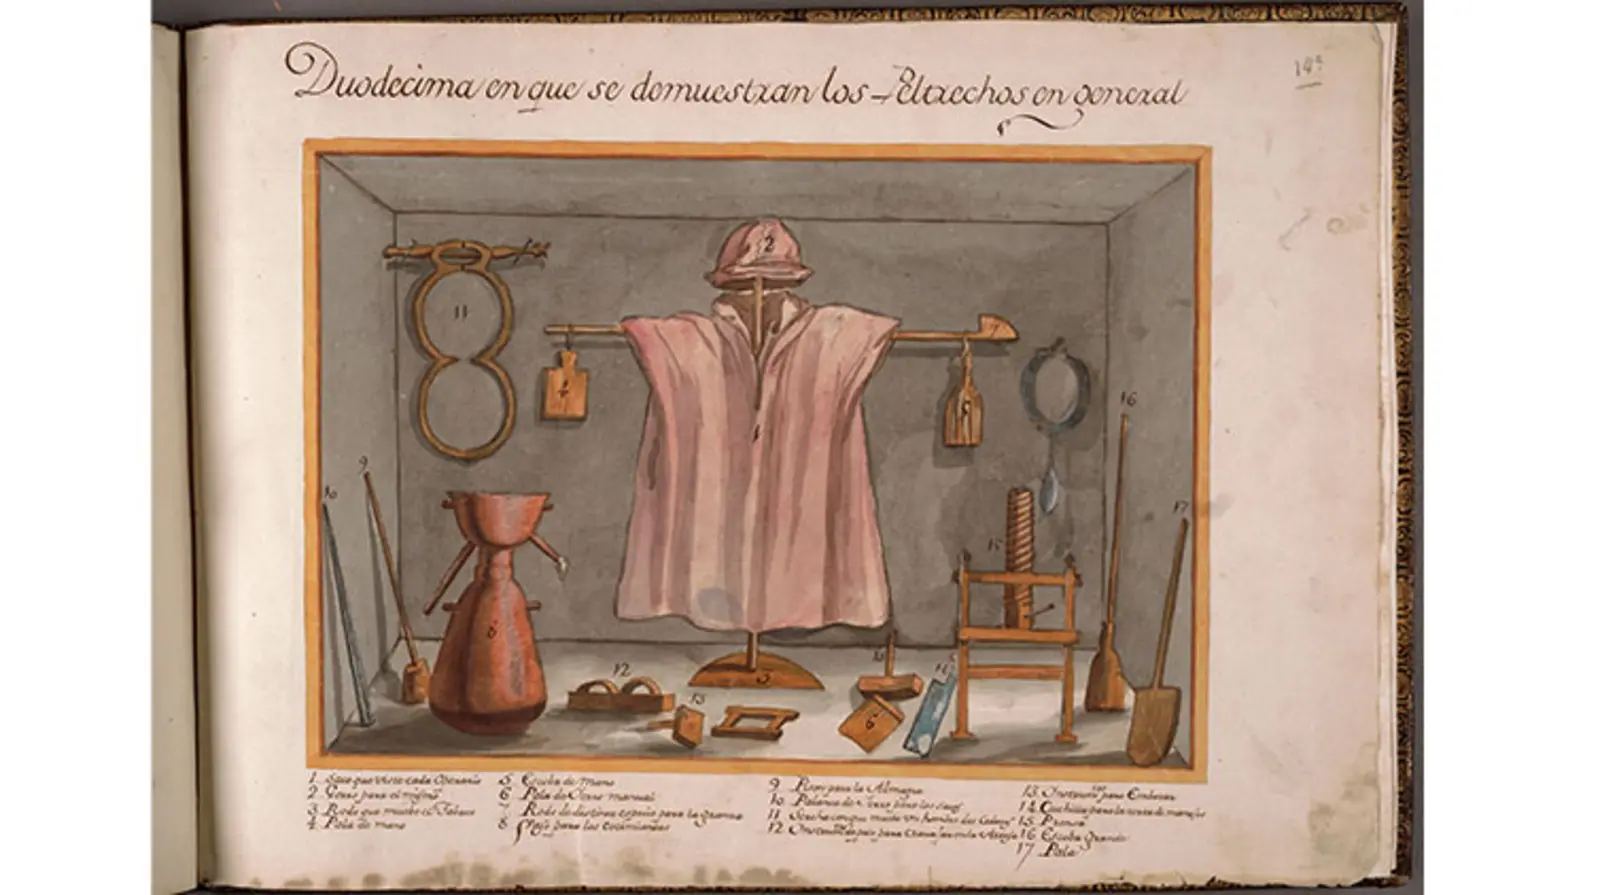 Rose-colored hat and robe with tobacco factory tools. Each tool is labeled at the bottom.